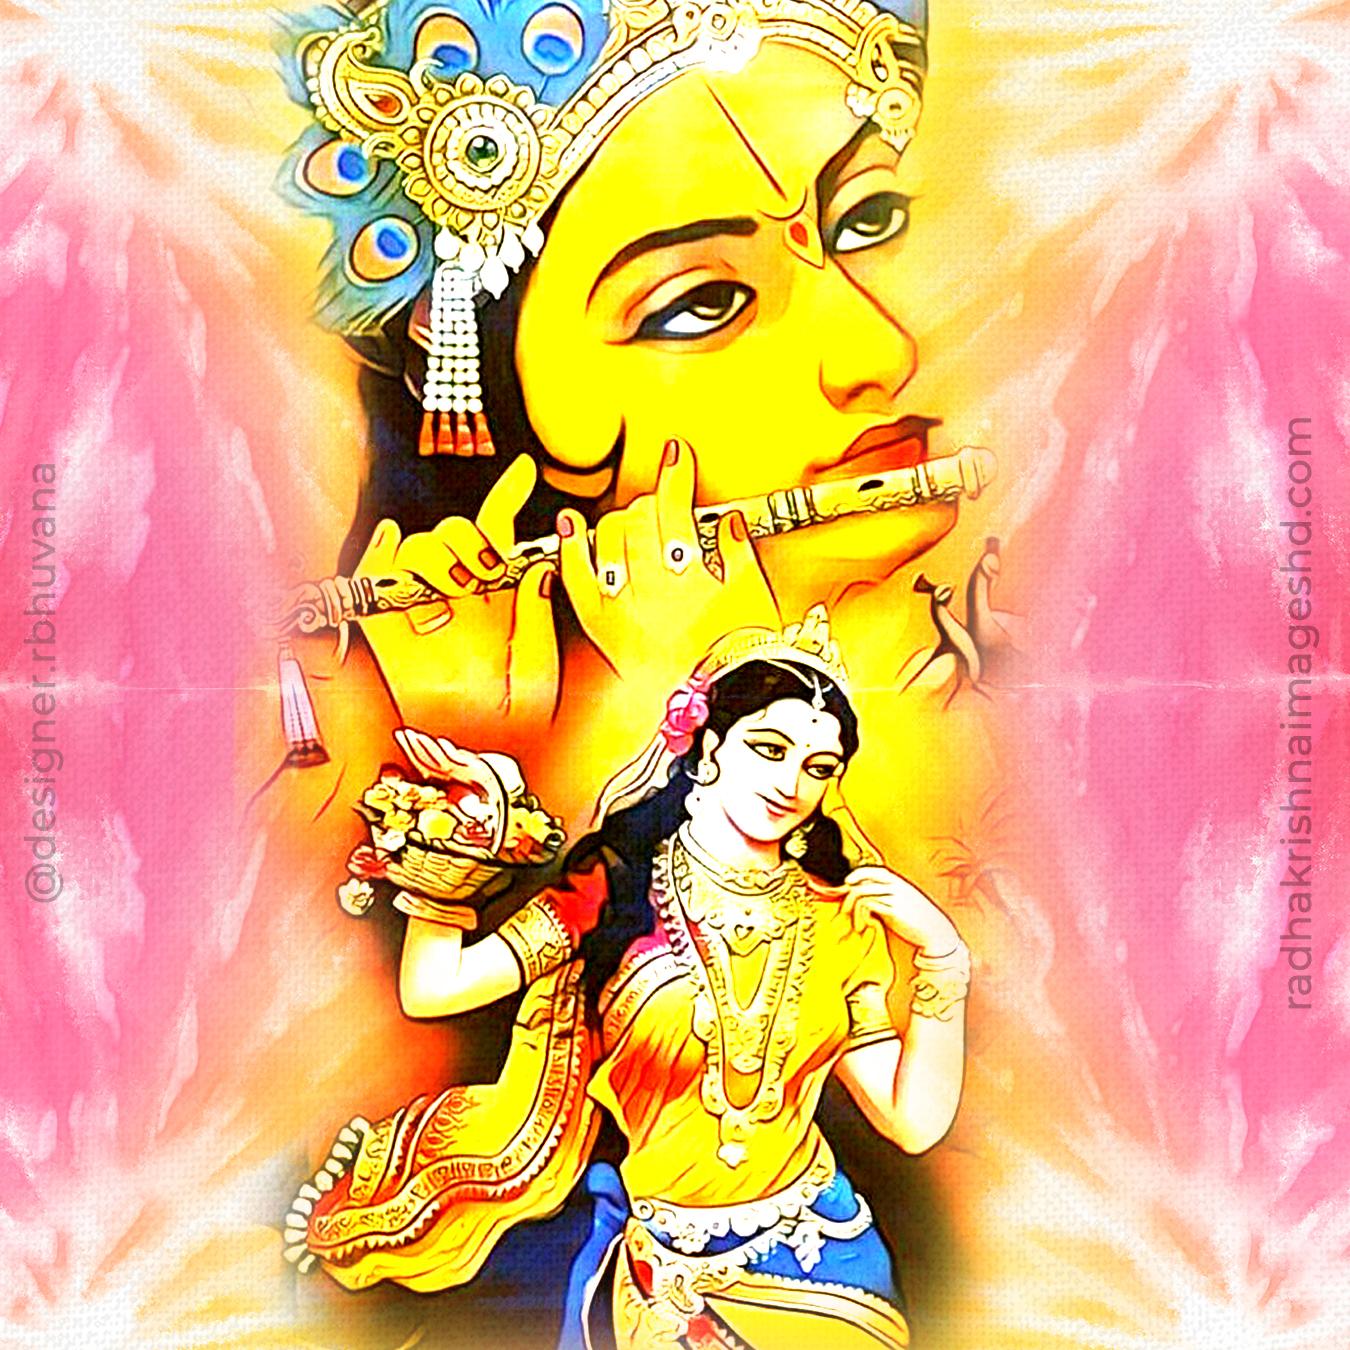 Radha Krishna Images Wallpapers Paintings Pictures Photos 5